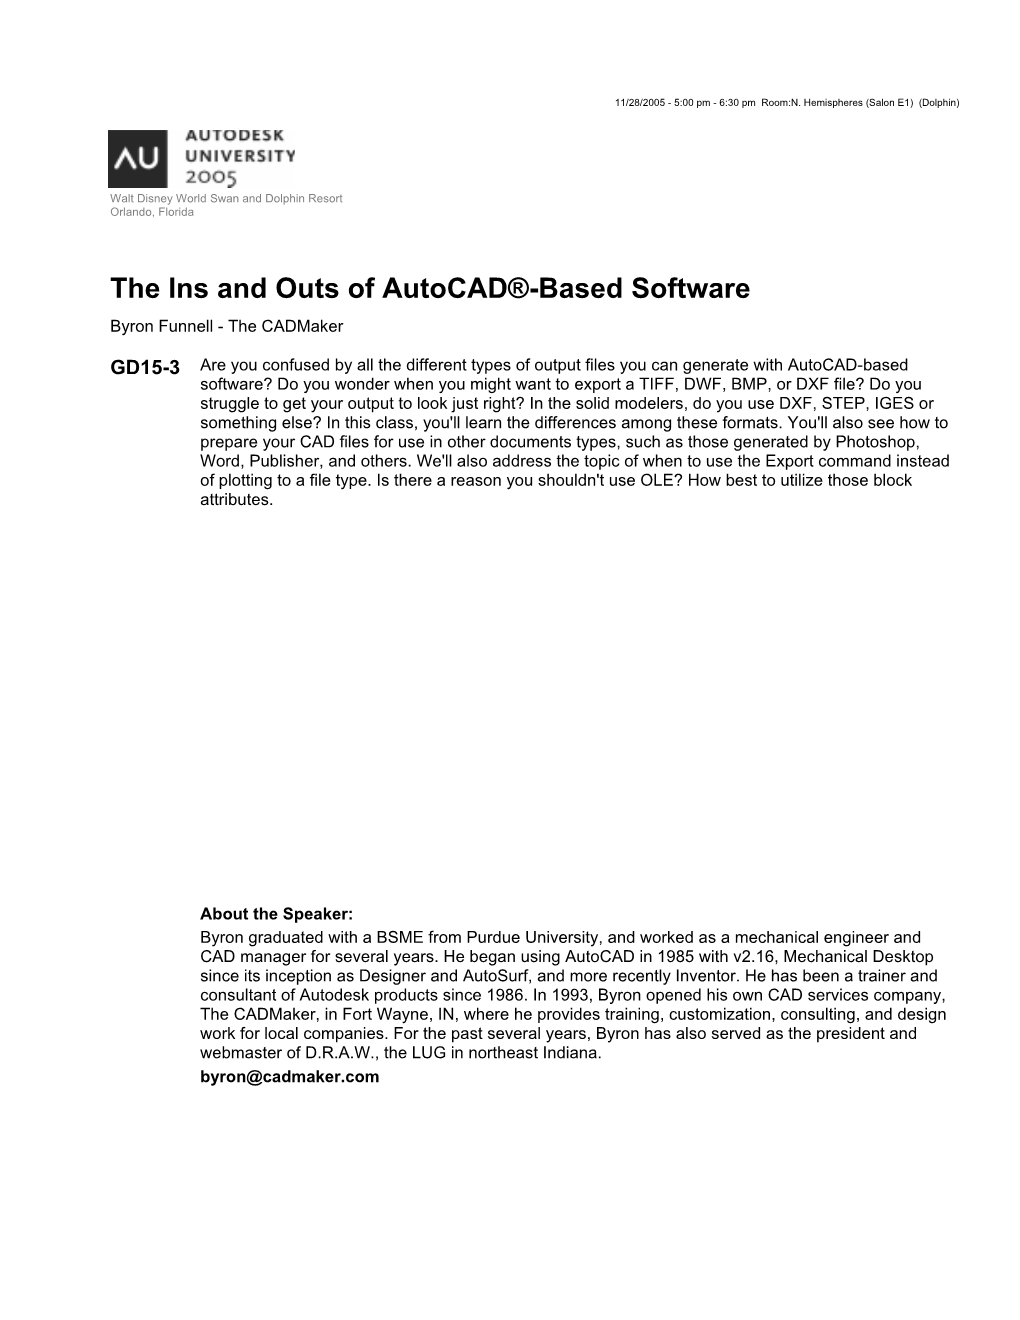 The Ins and Outs of Autocad®-Based Software Byron Funnell - the Cadmaker